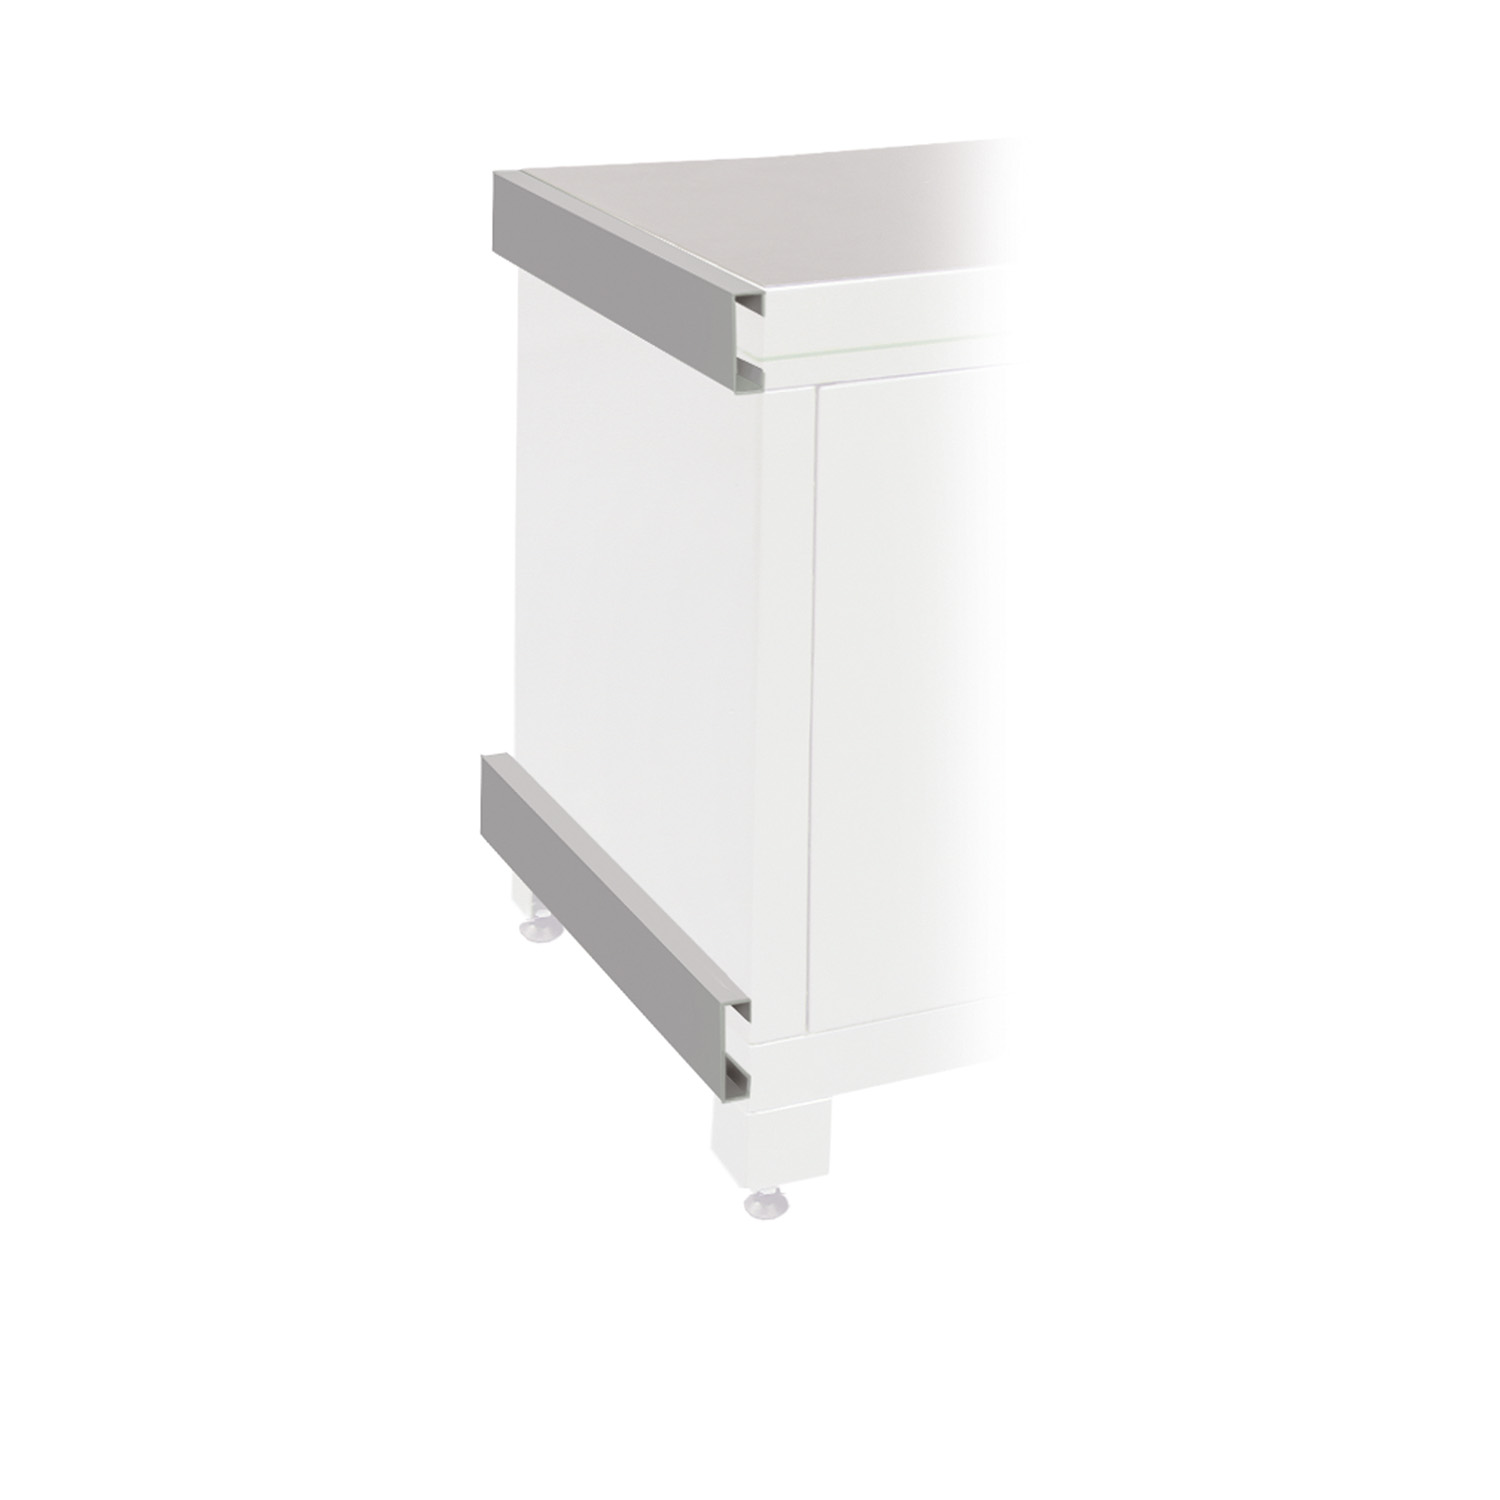 Support pour armoire d’angle (x2)